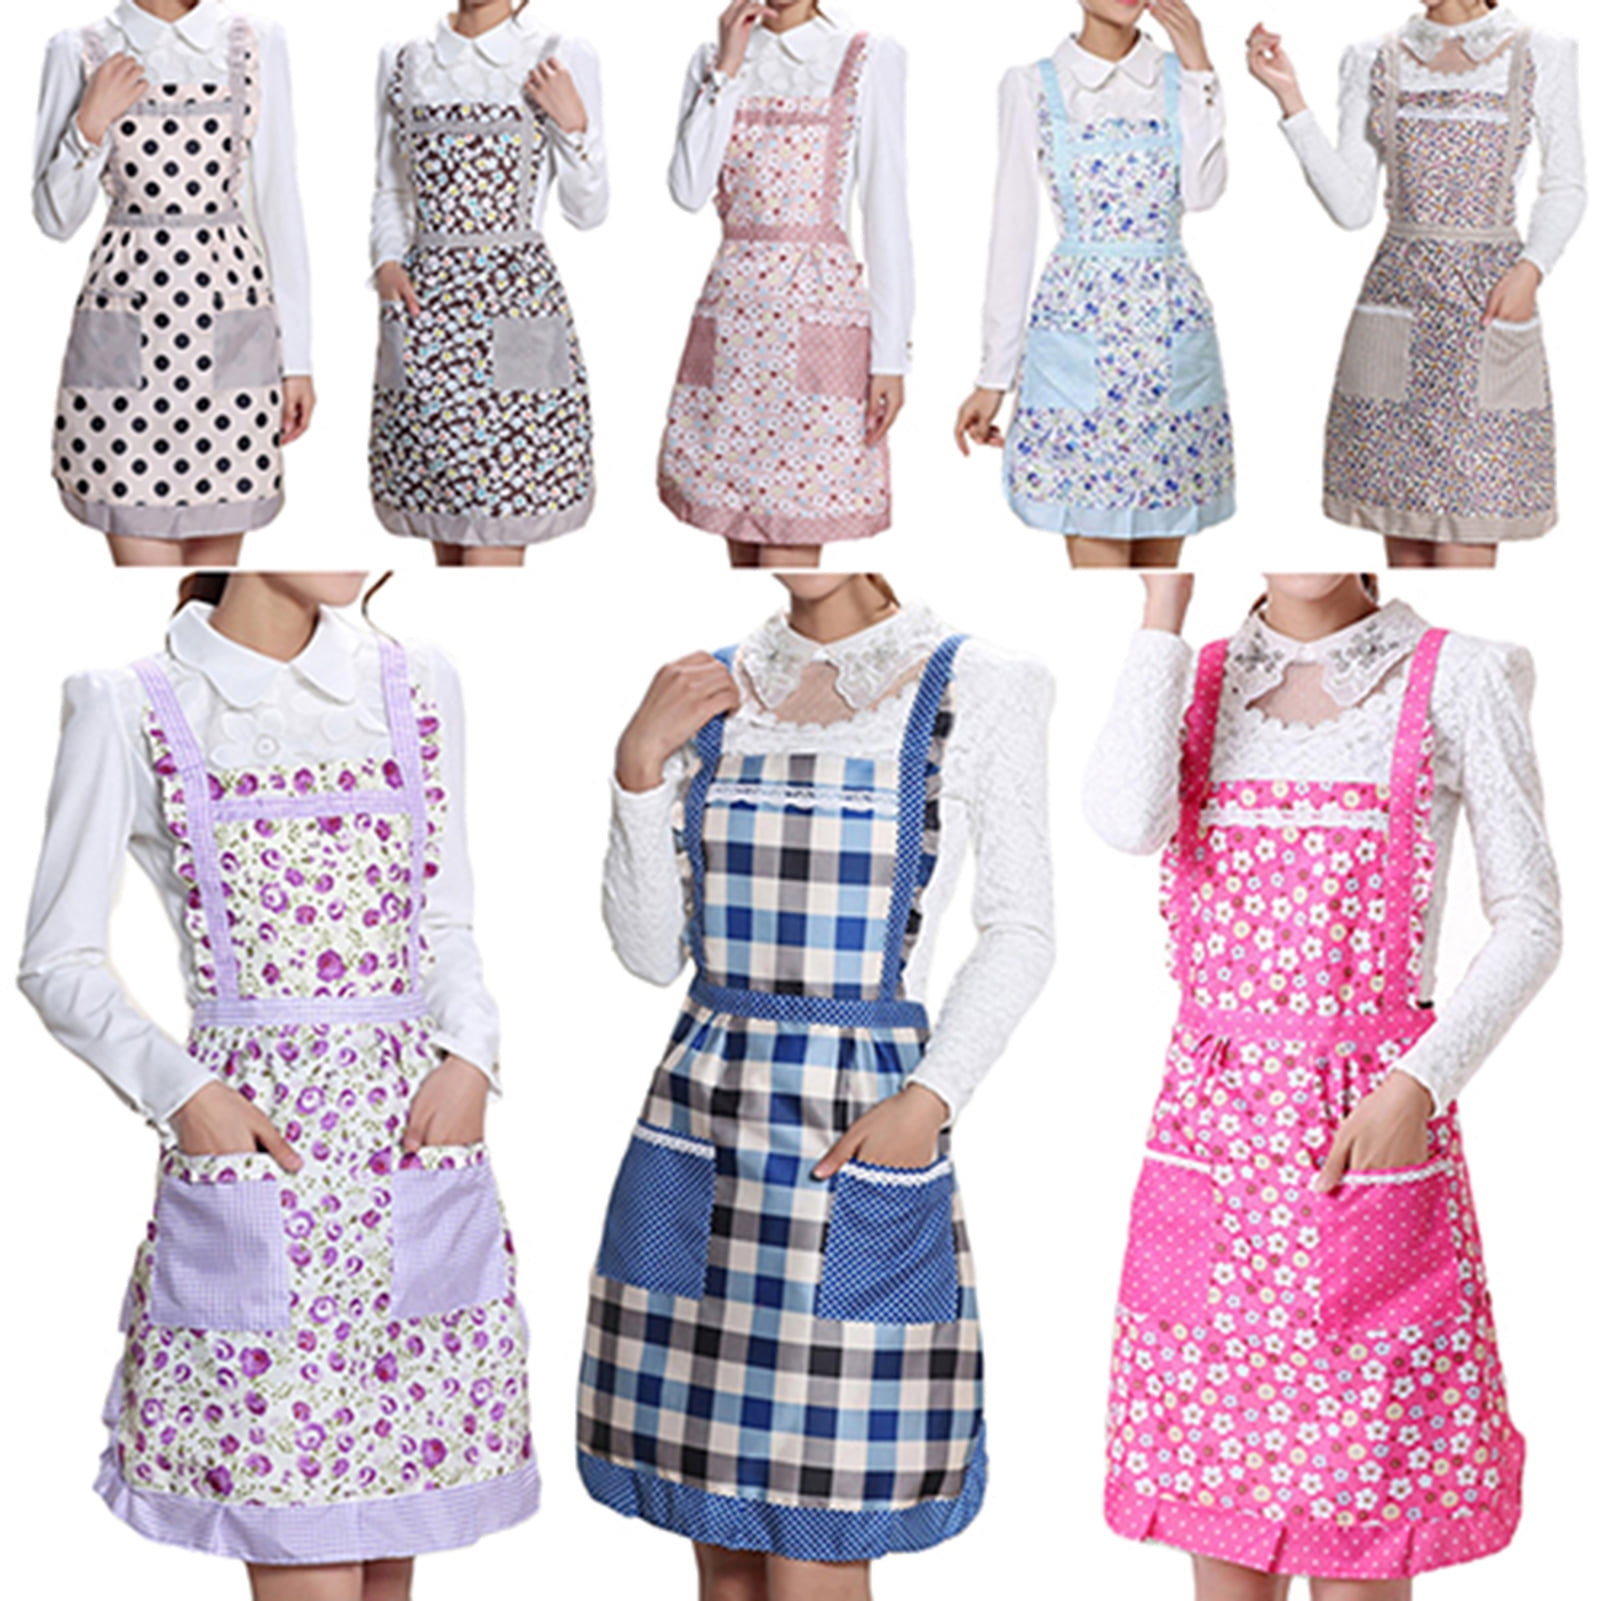 Fashion Home Farm Apron Pockets Collecting Holds Apron Chicken KitchenDining Bar Plus Size Salon Smocks for Clients Lot of Servers Pinafore Apron